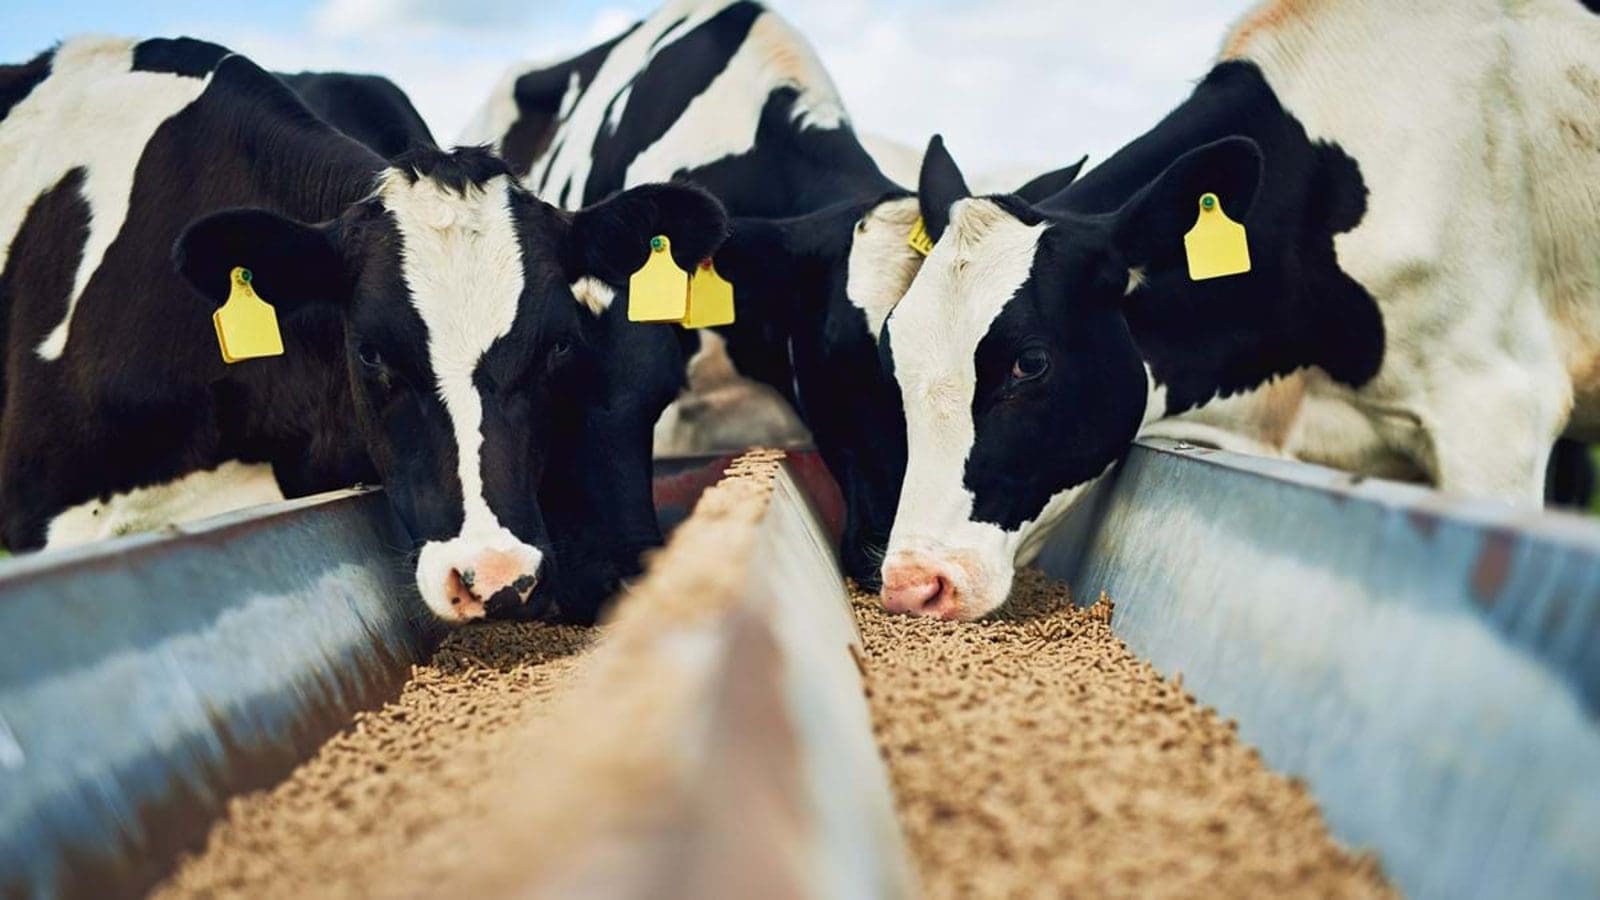 Elanco Animal Health and Cattler Corporation partner on data solutions for cattle feeders